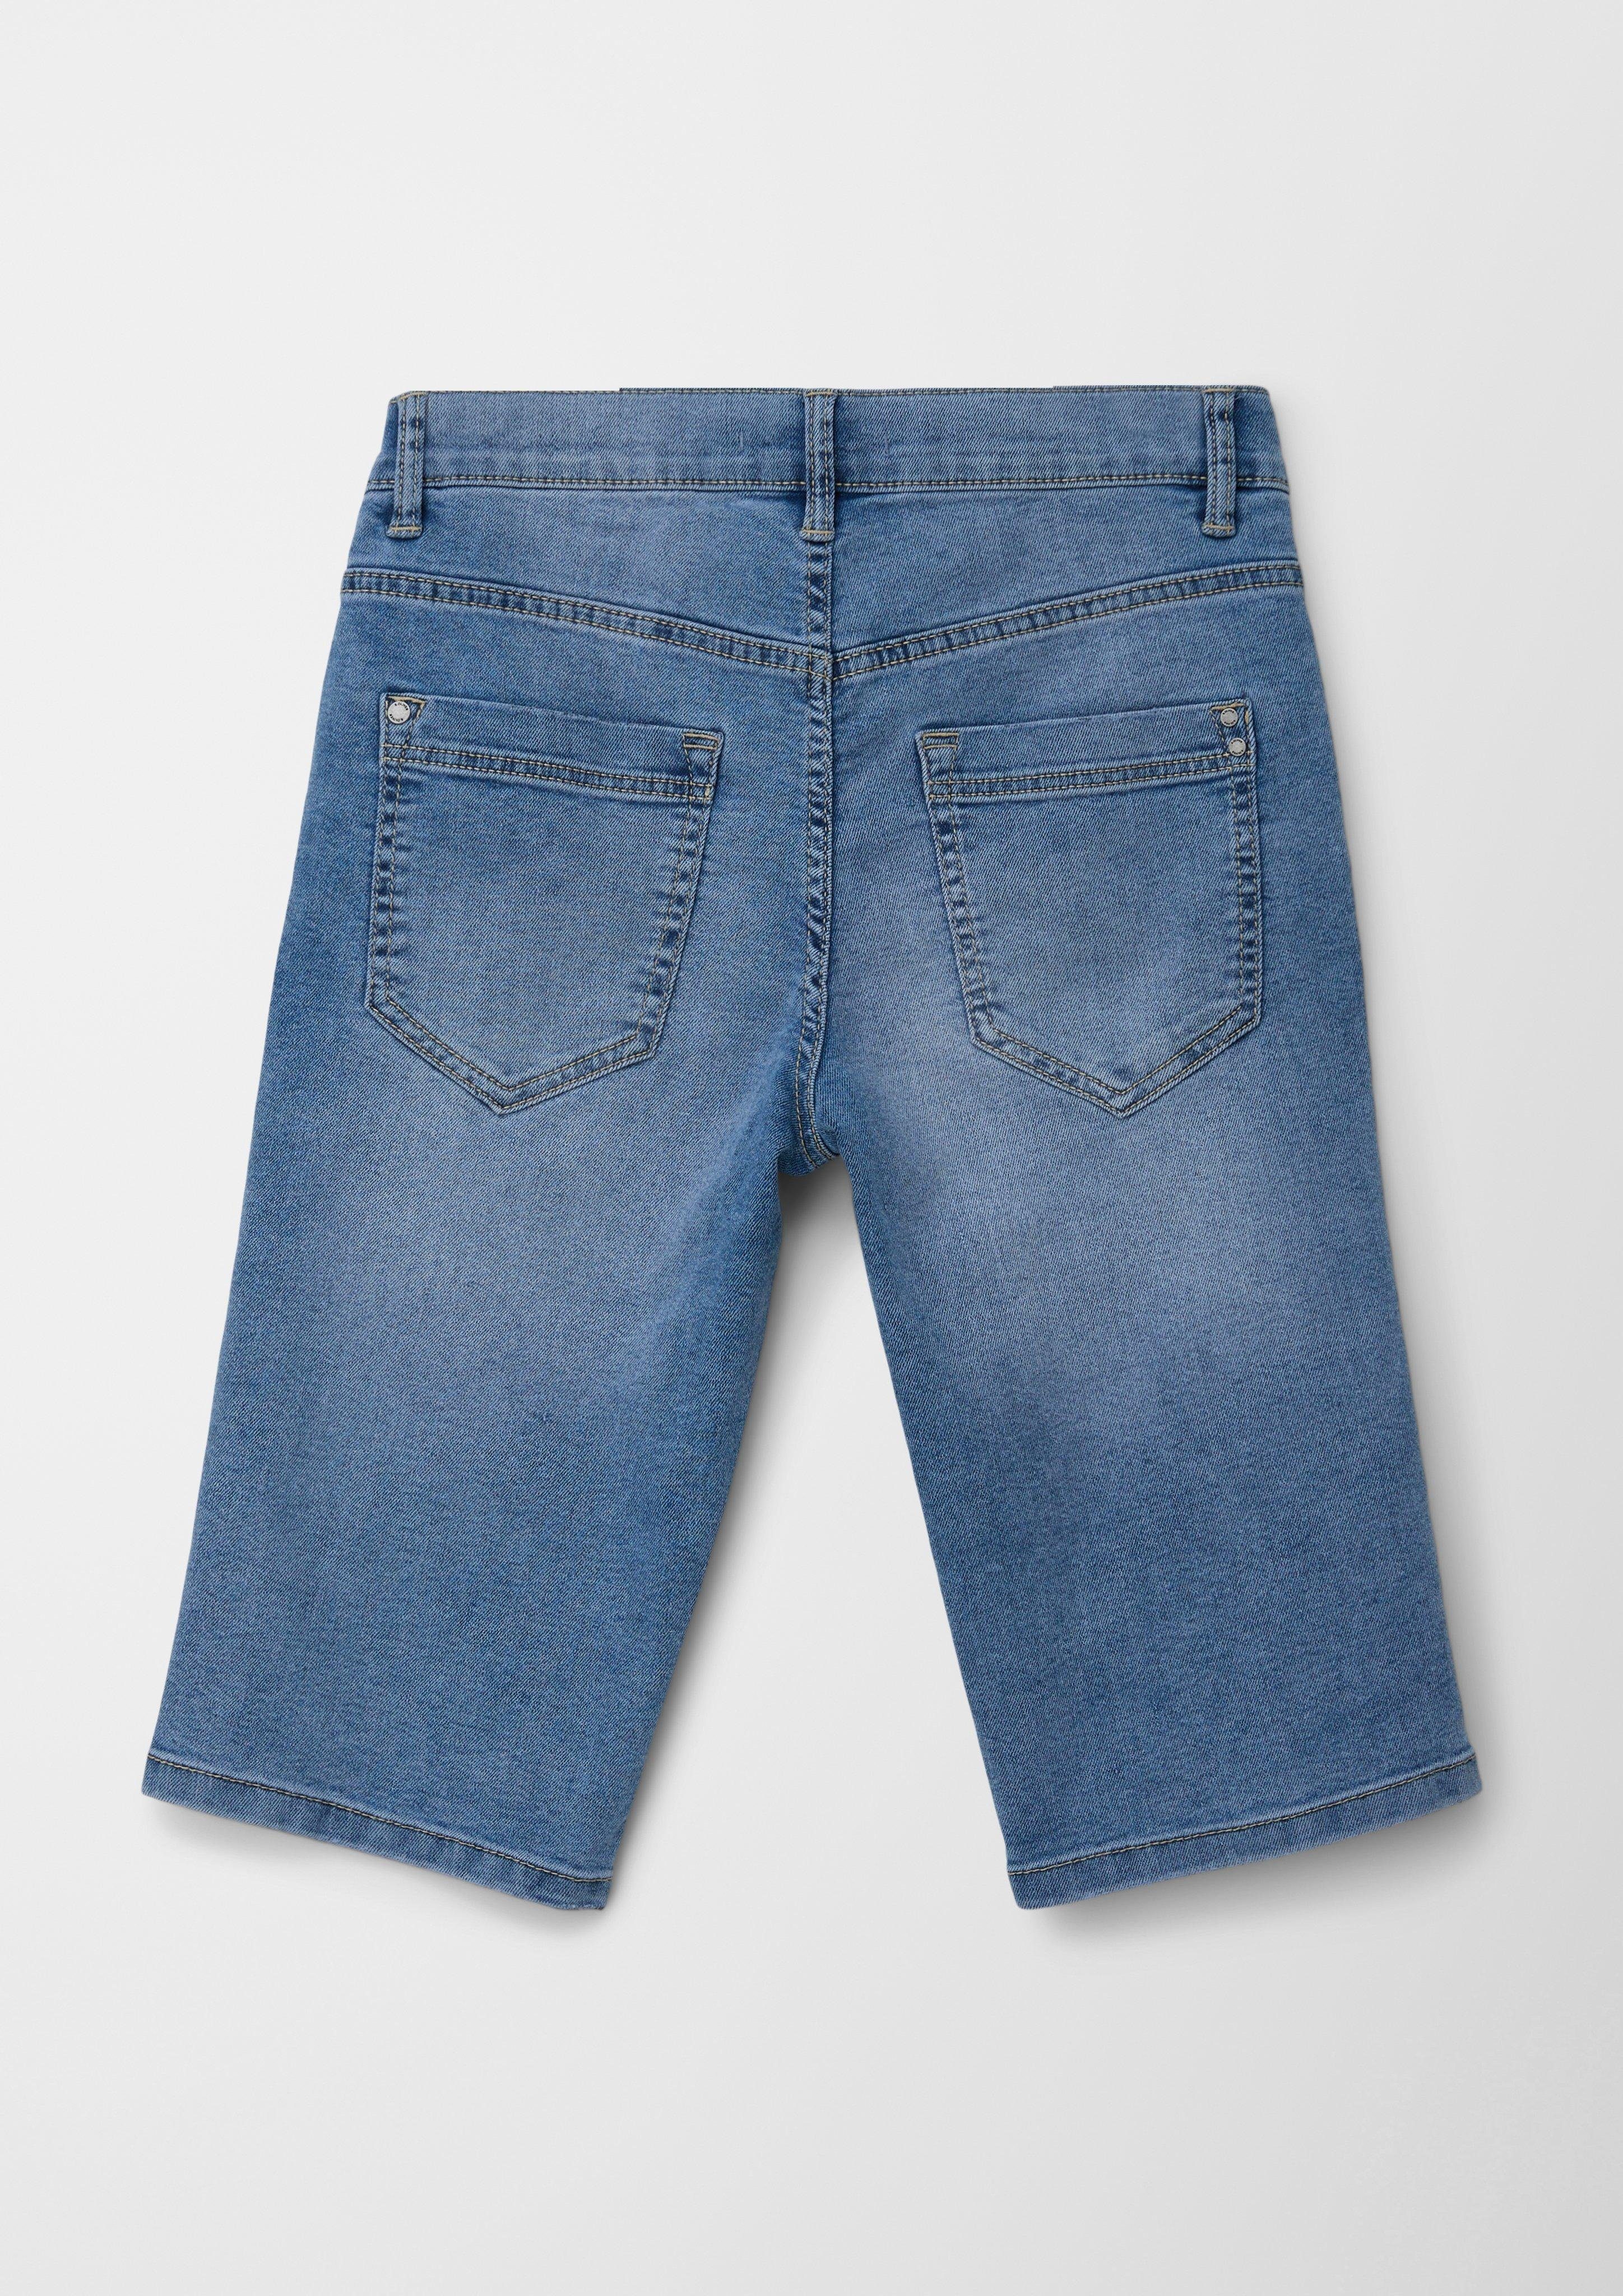 s.Oliver 7/8-Jeans Seattle: Waschung Jeans Waschung mit